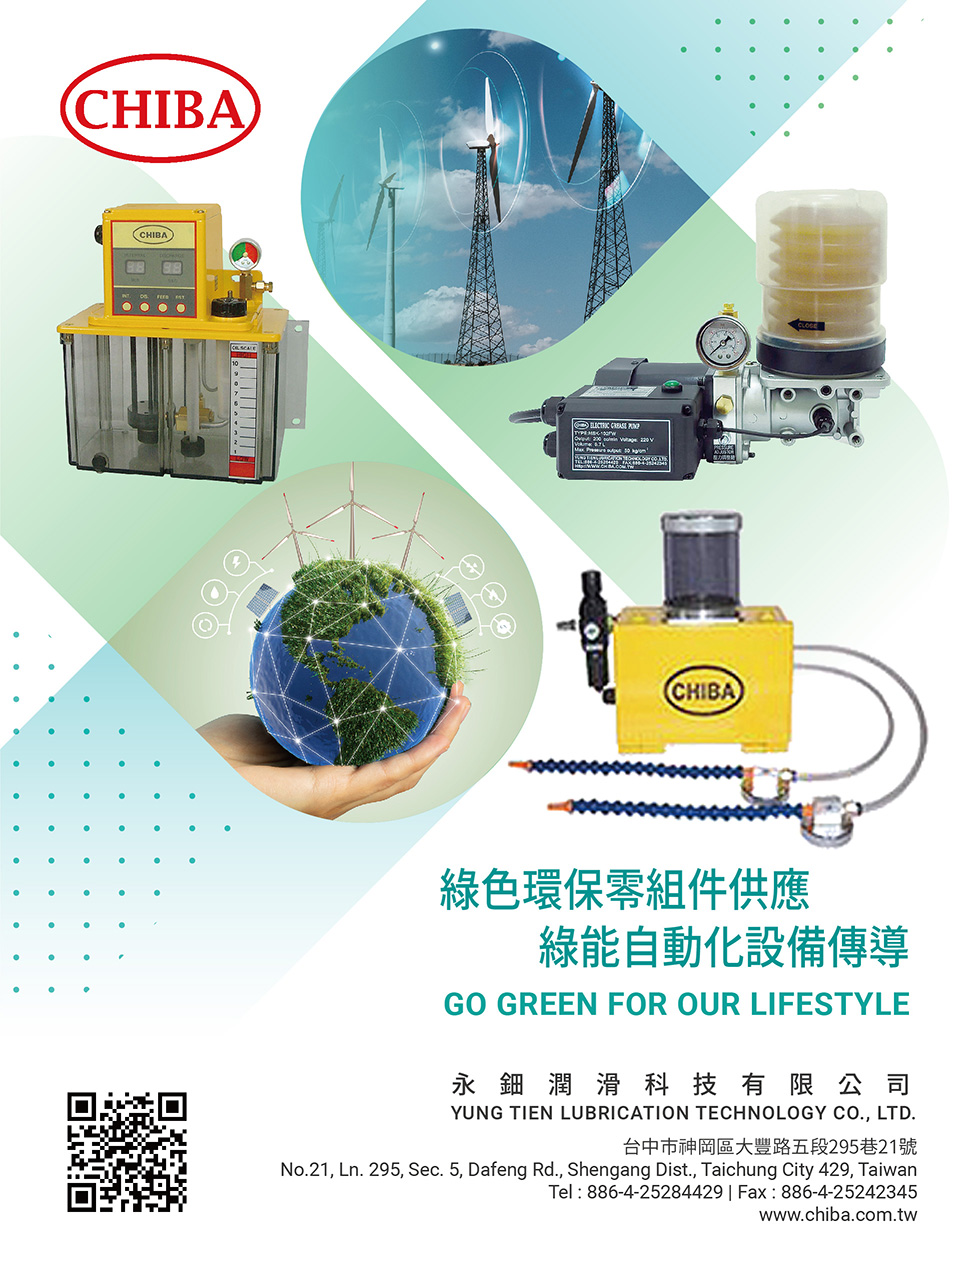 YUNG TIEN LUBRICATION TECHNOLOGY CO., LTD.